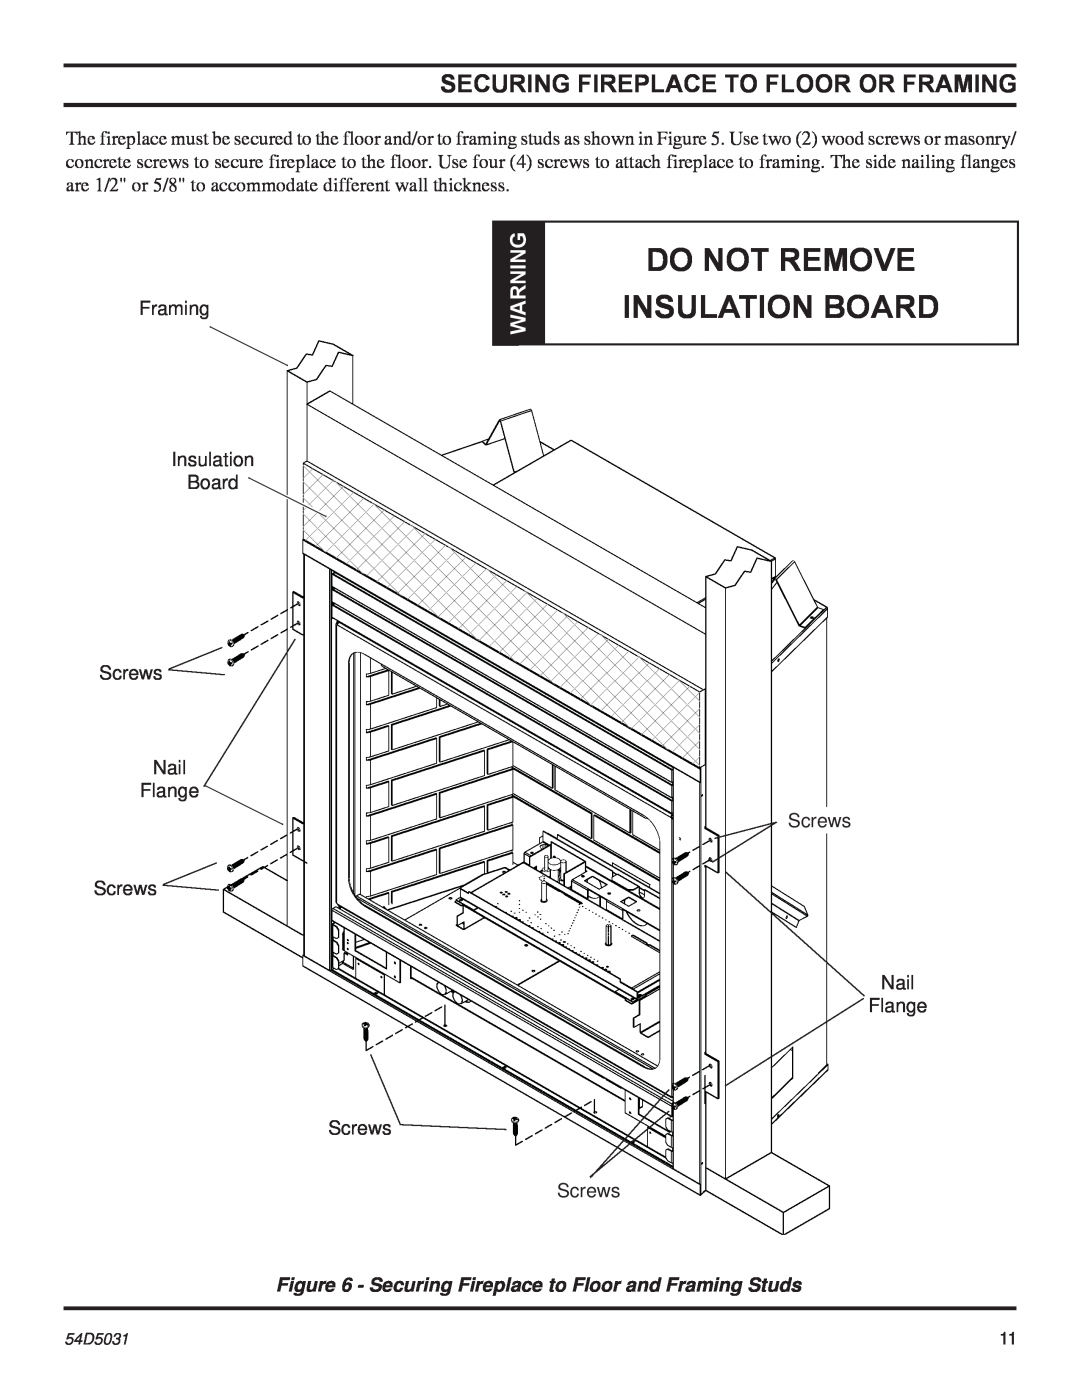 Monessen Hearth HBDV300, HBDV400 manual Do Not Remove, Insulation Board, Securing Fireplace To Floor Or Framing 